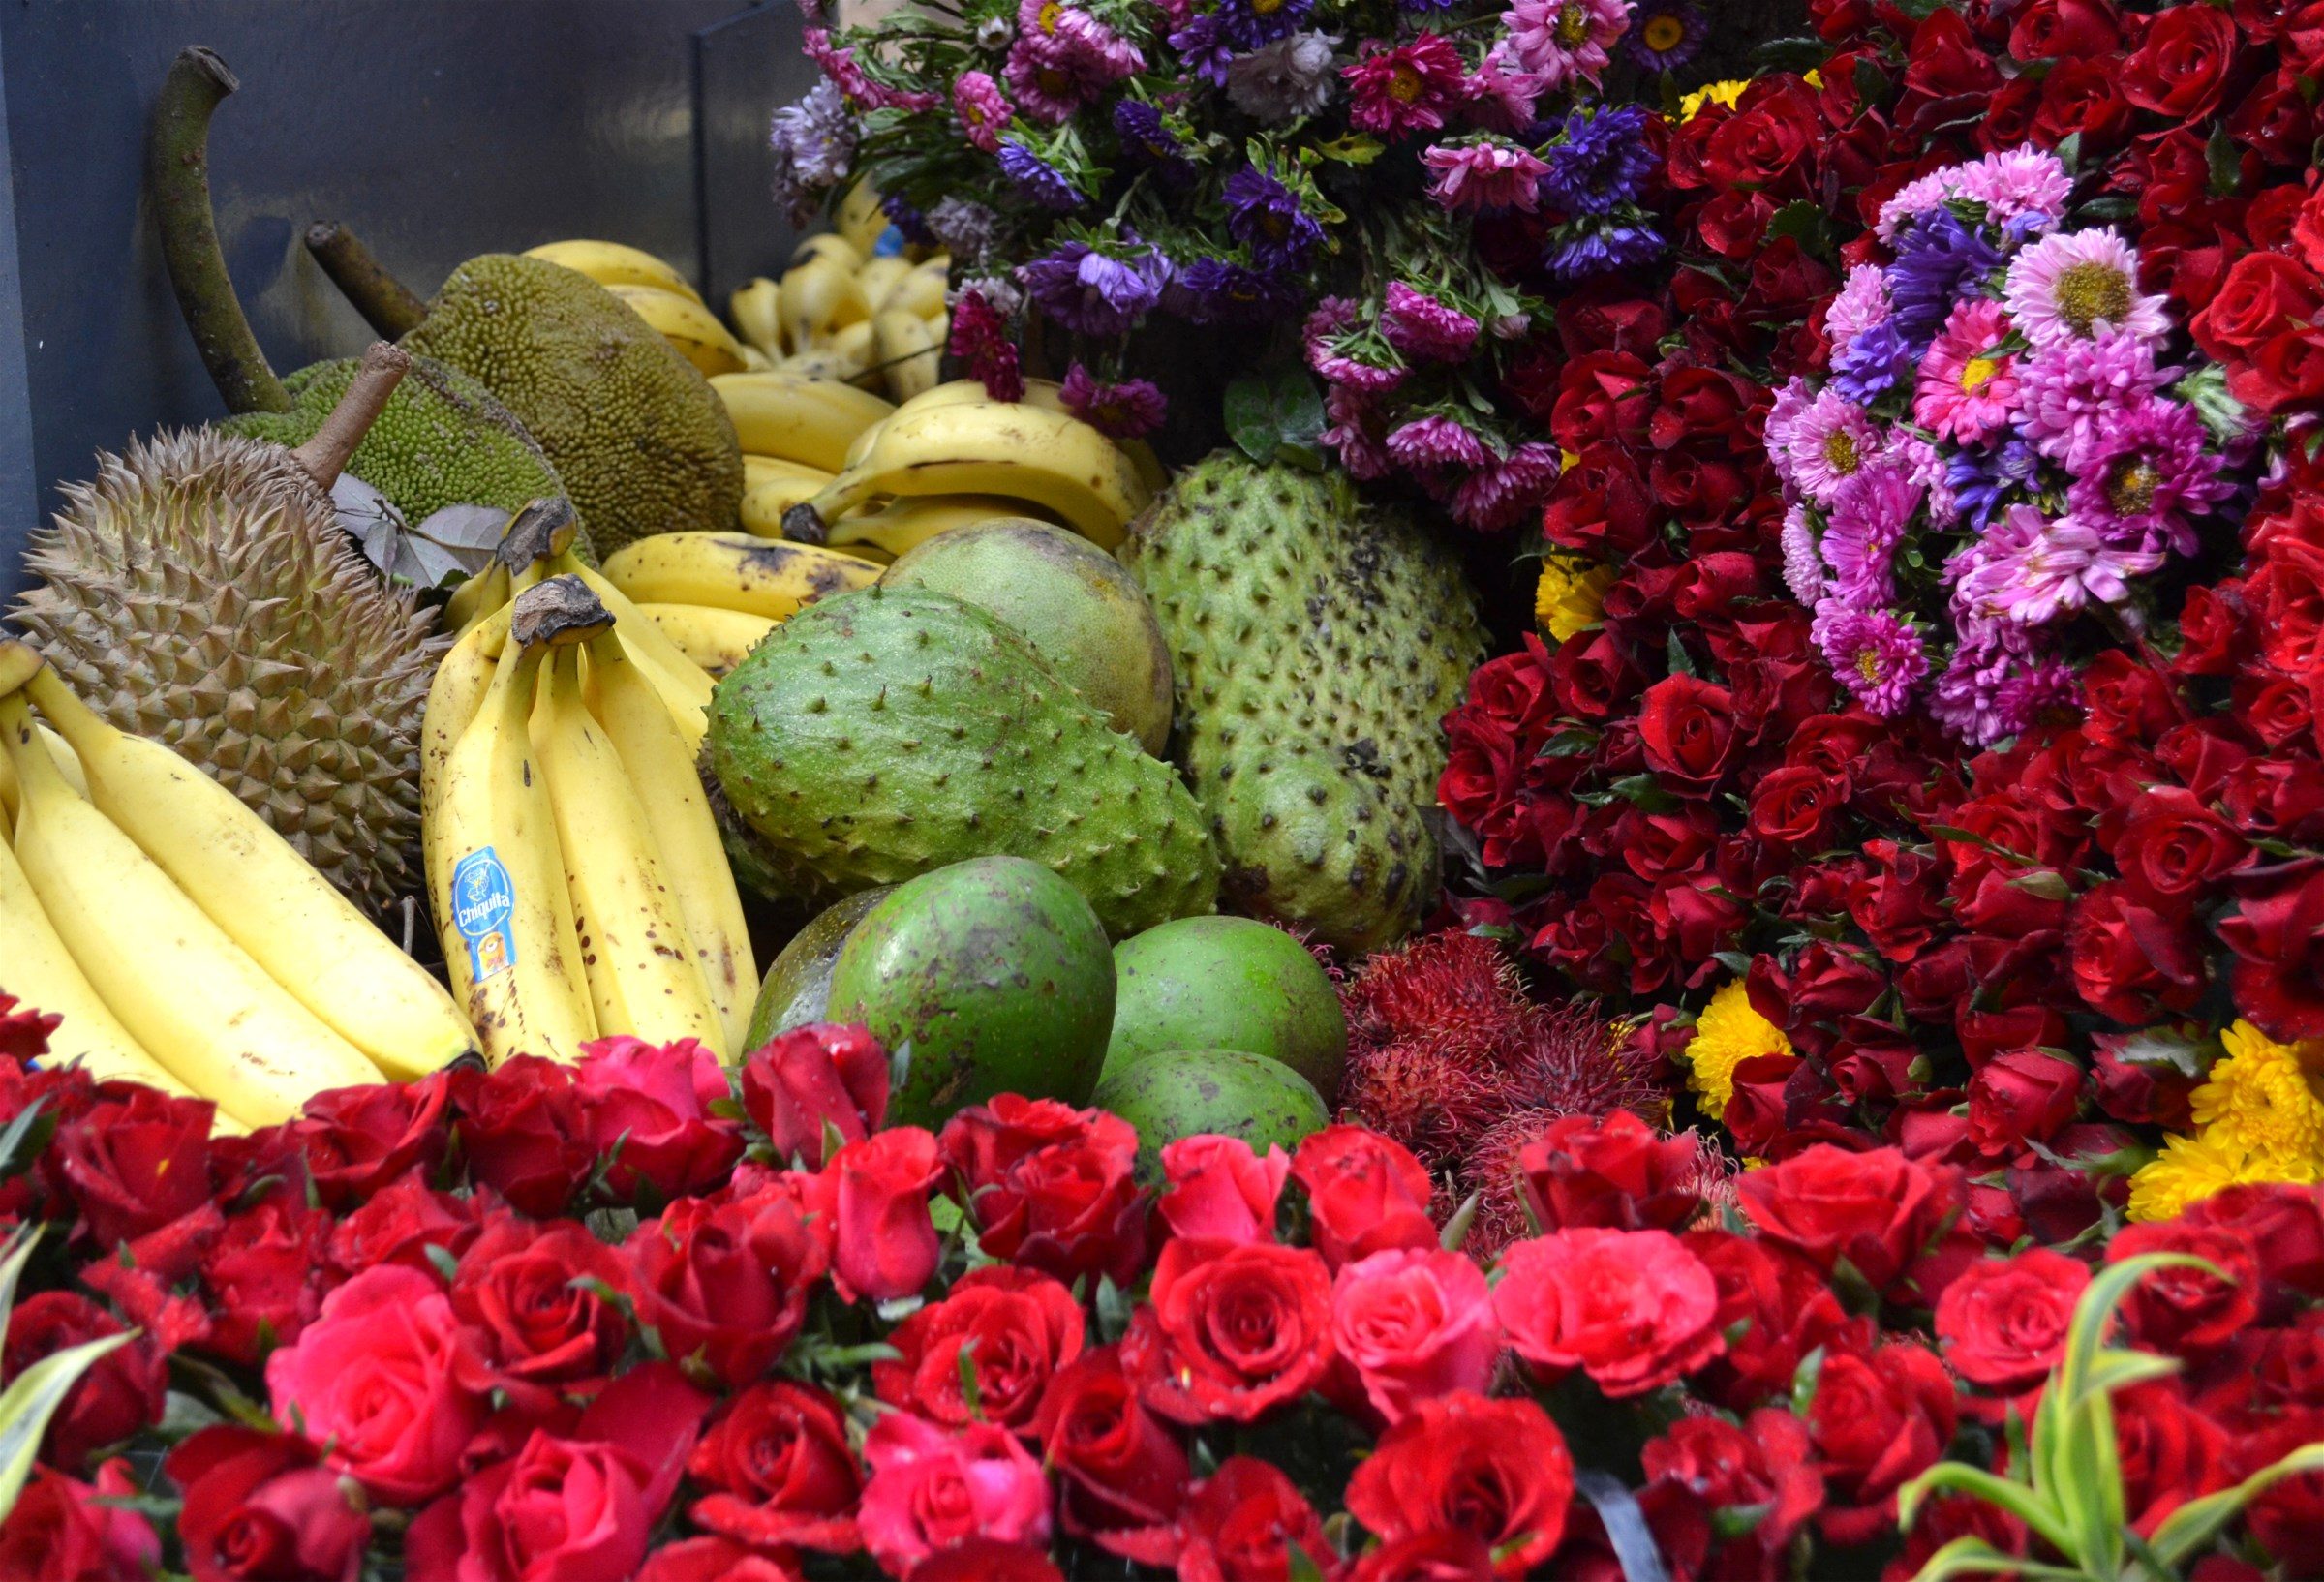 Flowers and fruits abound not only in the streets but also as motif of floral floats. Photo by Henrylito D. Tacio 